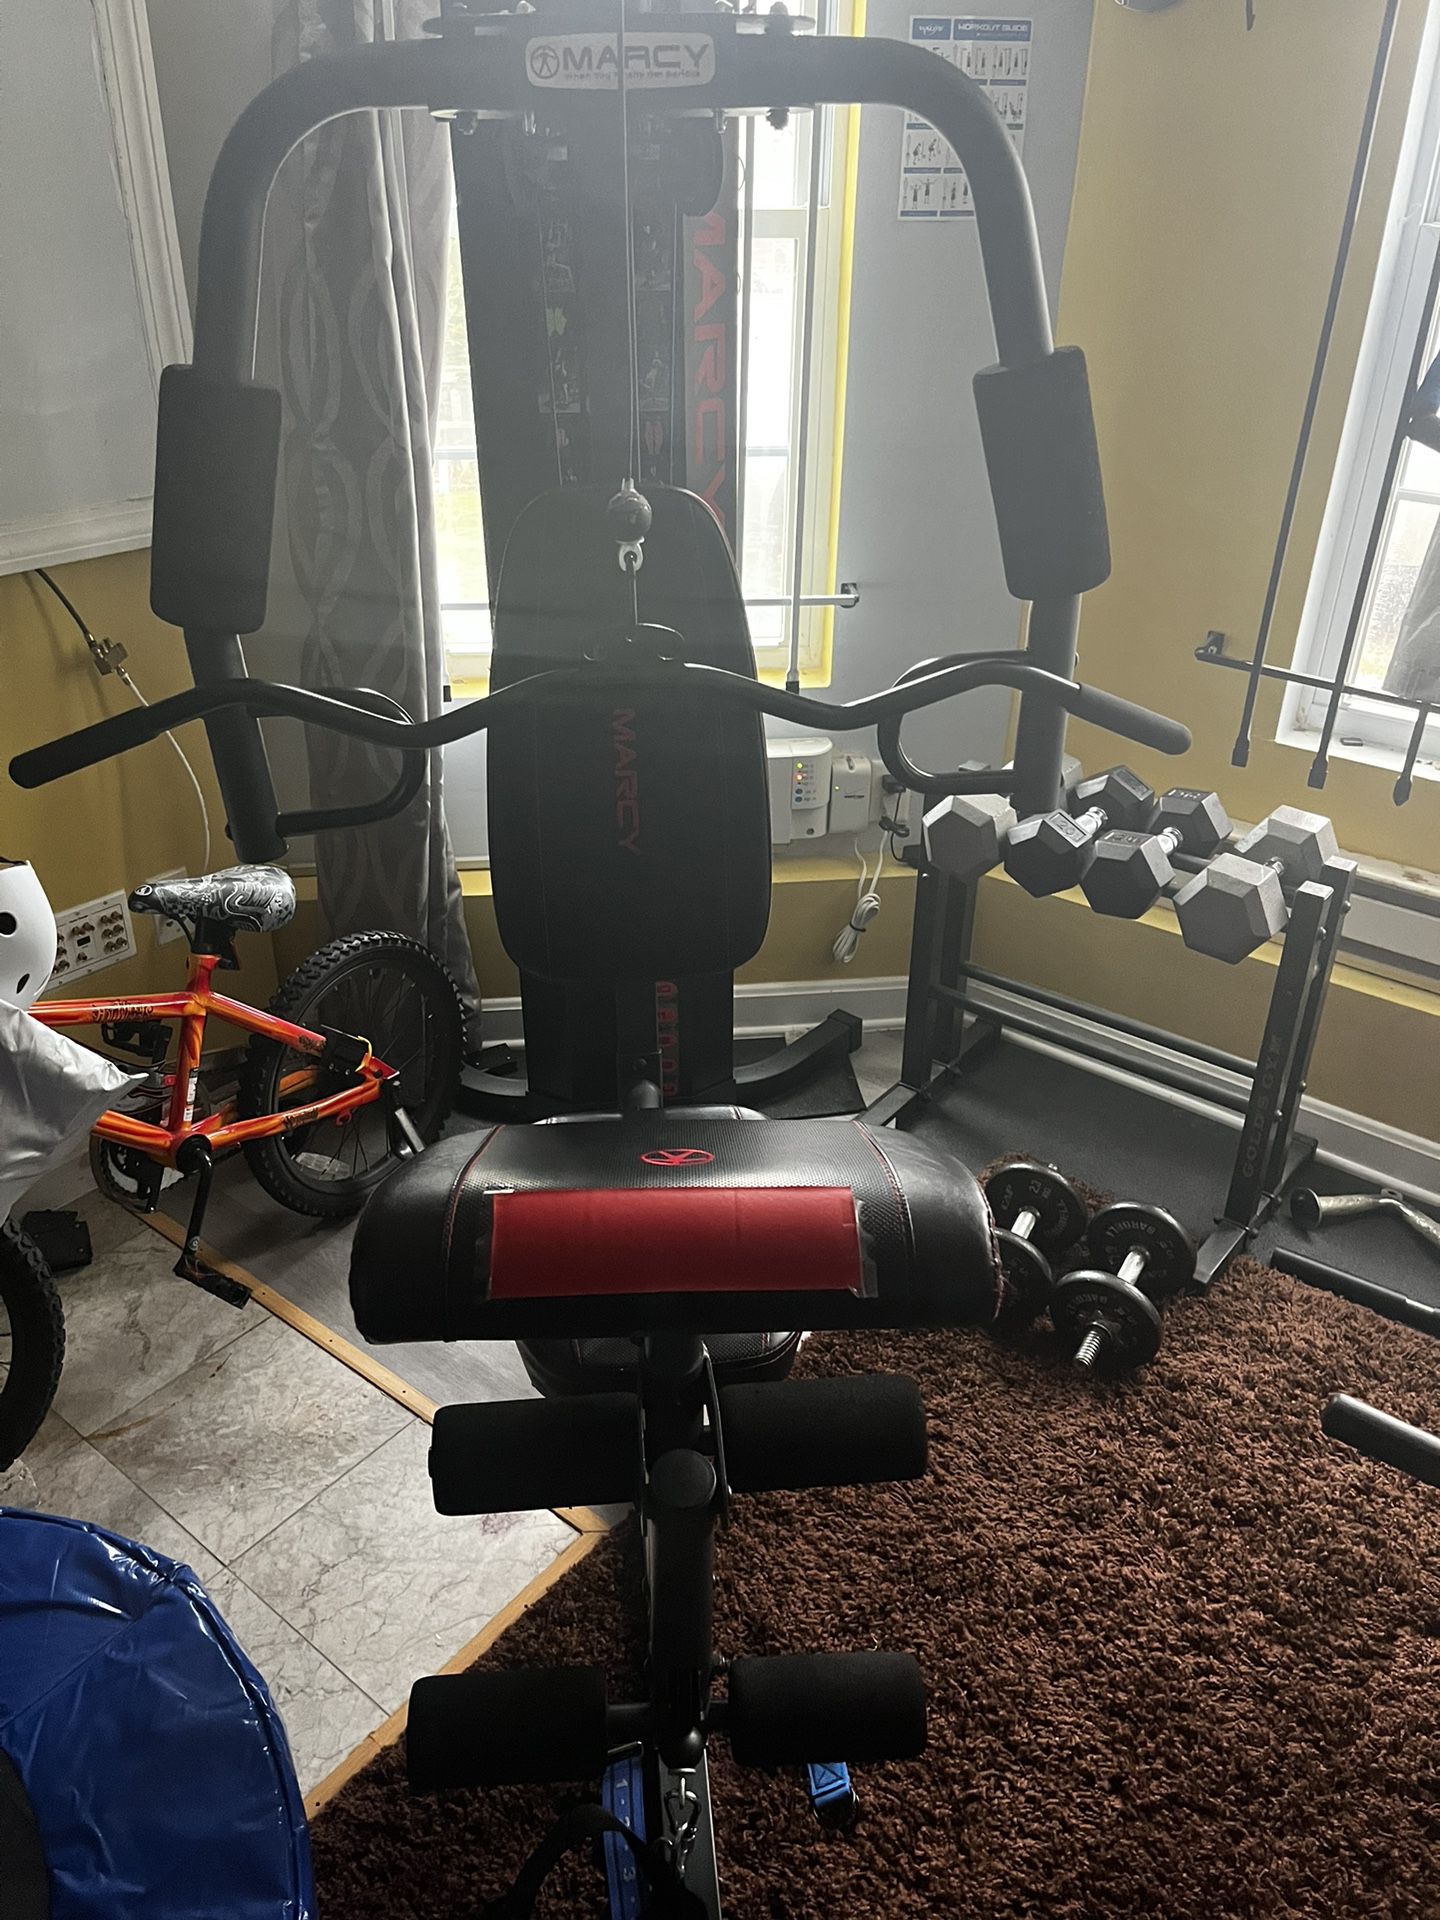 Marcy Home gym